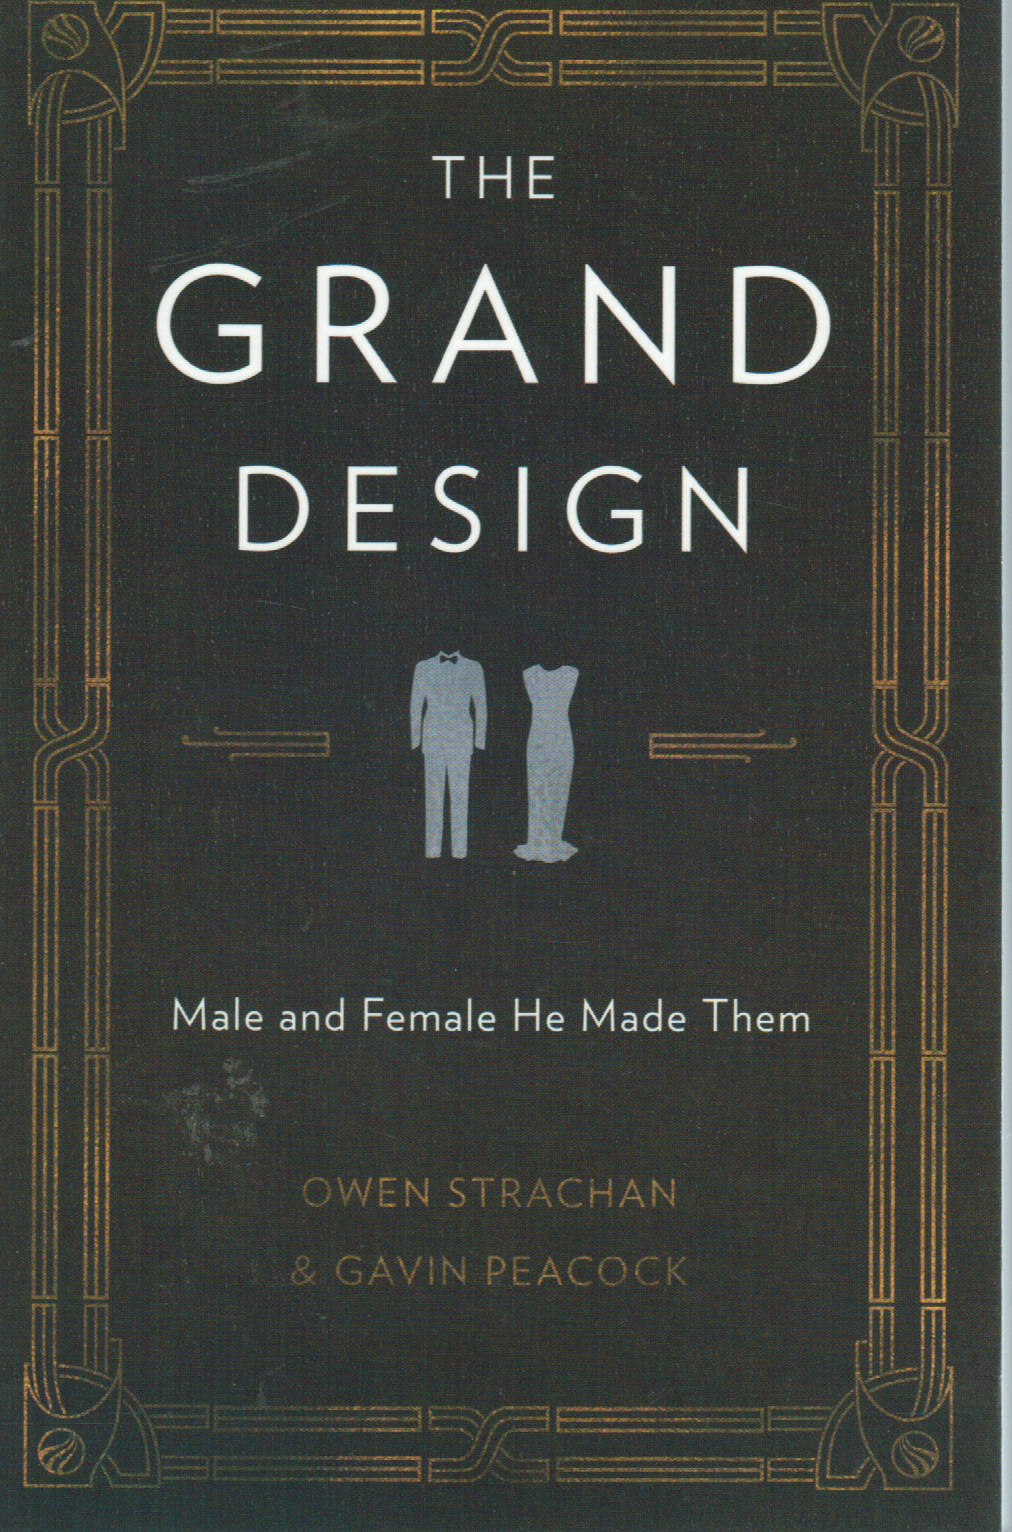 The Grand Design: Male and Female He Made Them